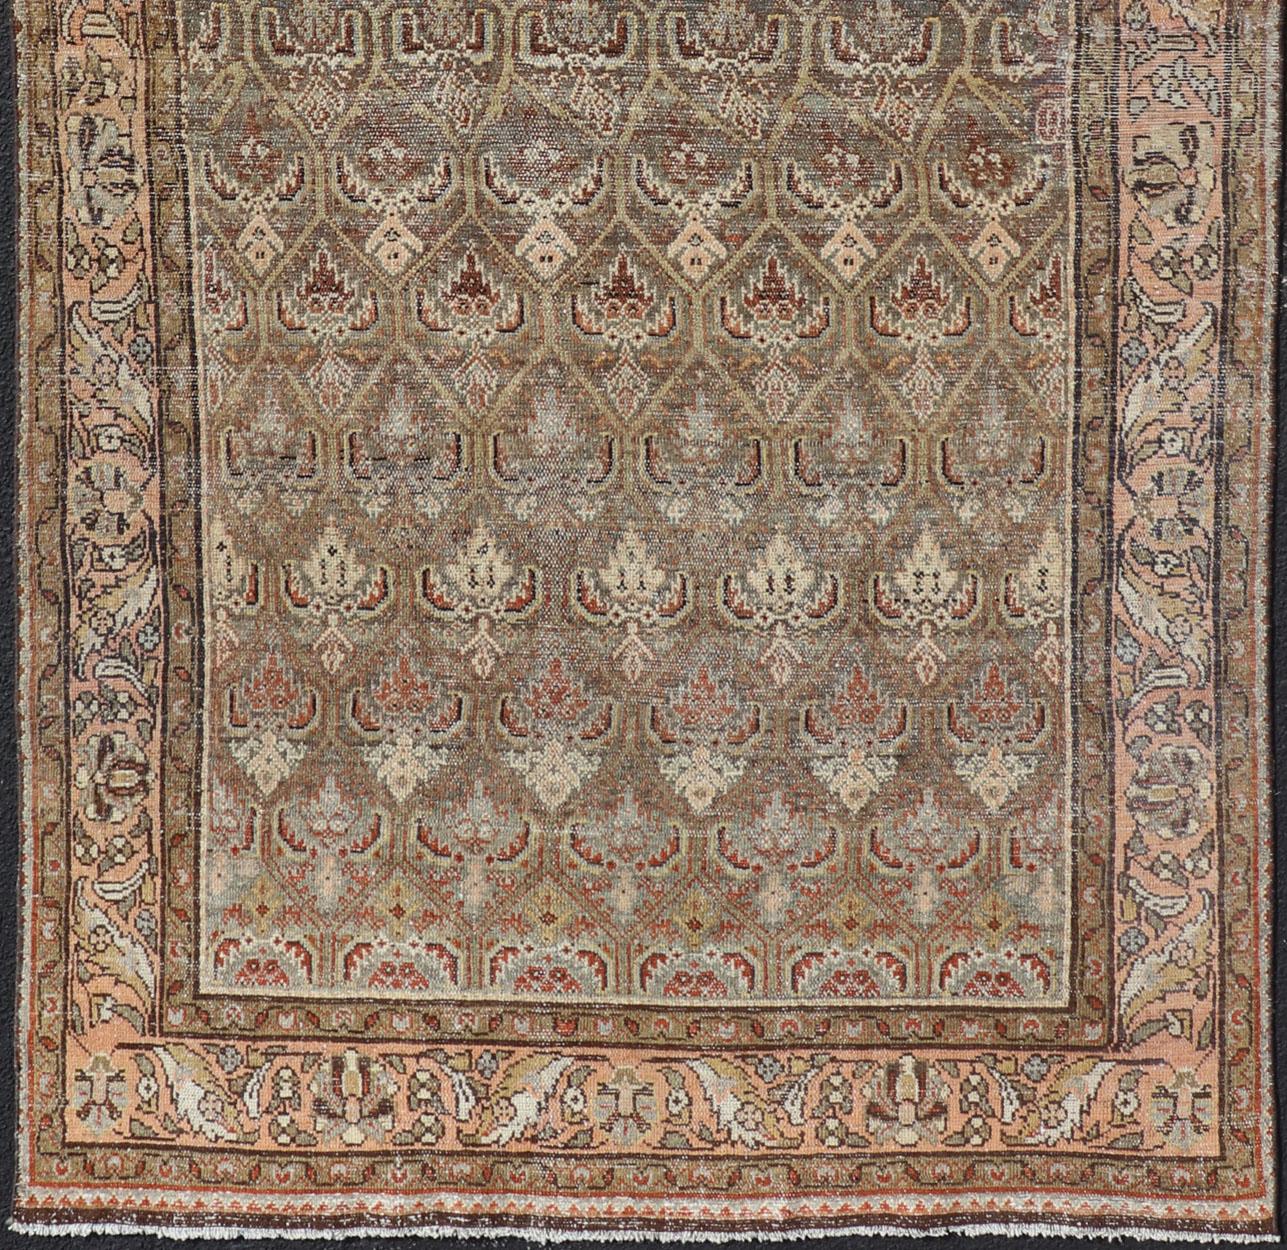 Kurdish antique gallery runner with all-over tribal design in brown's and pink. Keivan Woven Arts / rug EMB-9609-P13863, country of origin / type: Iran / Kurdish, circa 1920.
This Kurdish antique gallery runner has held timeless charm with a